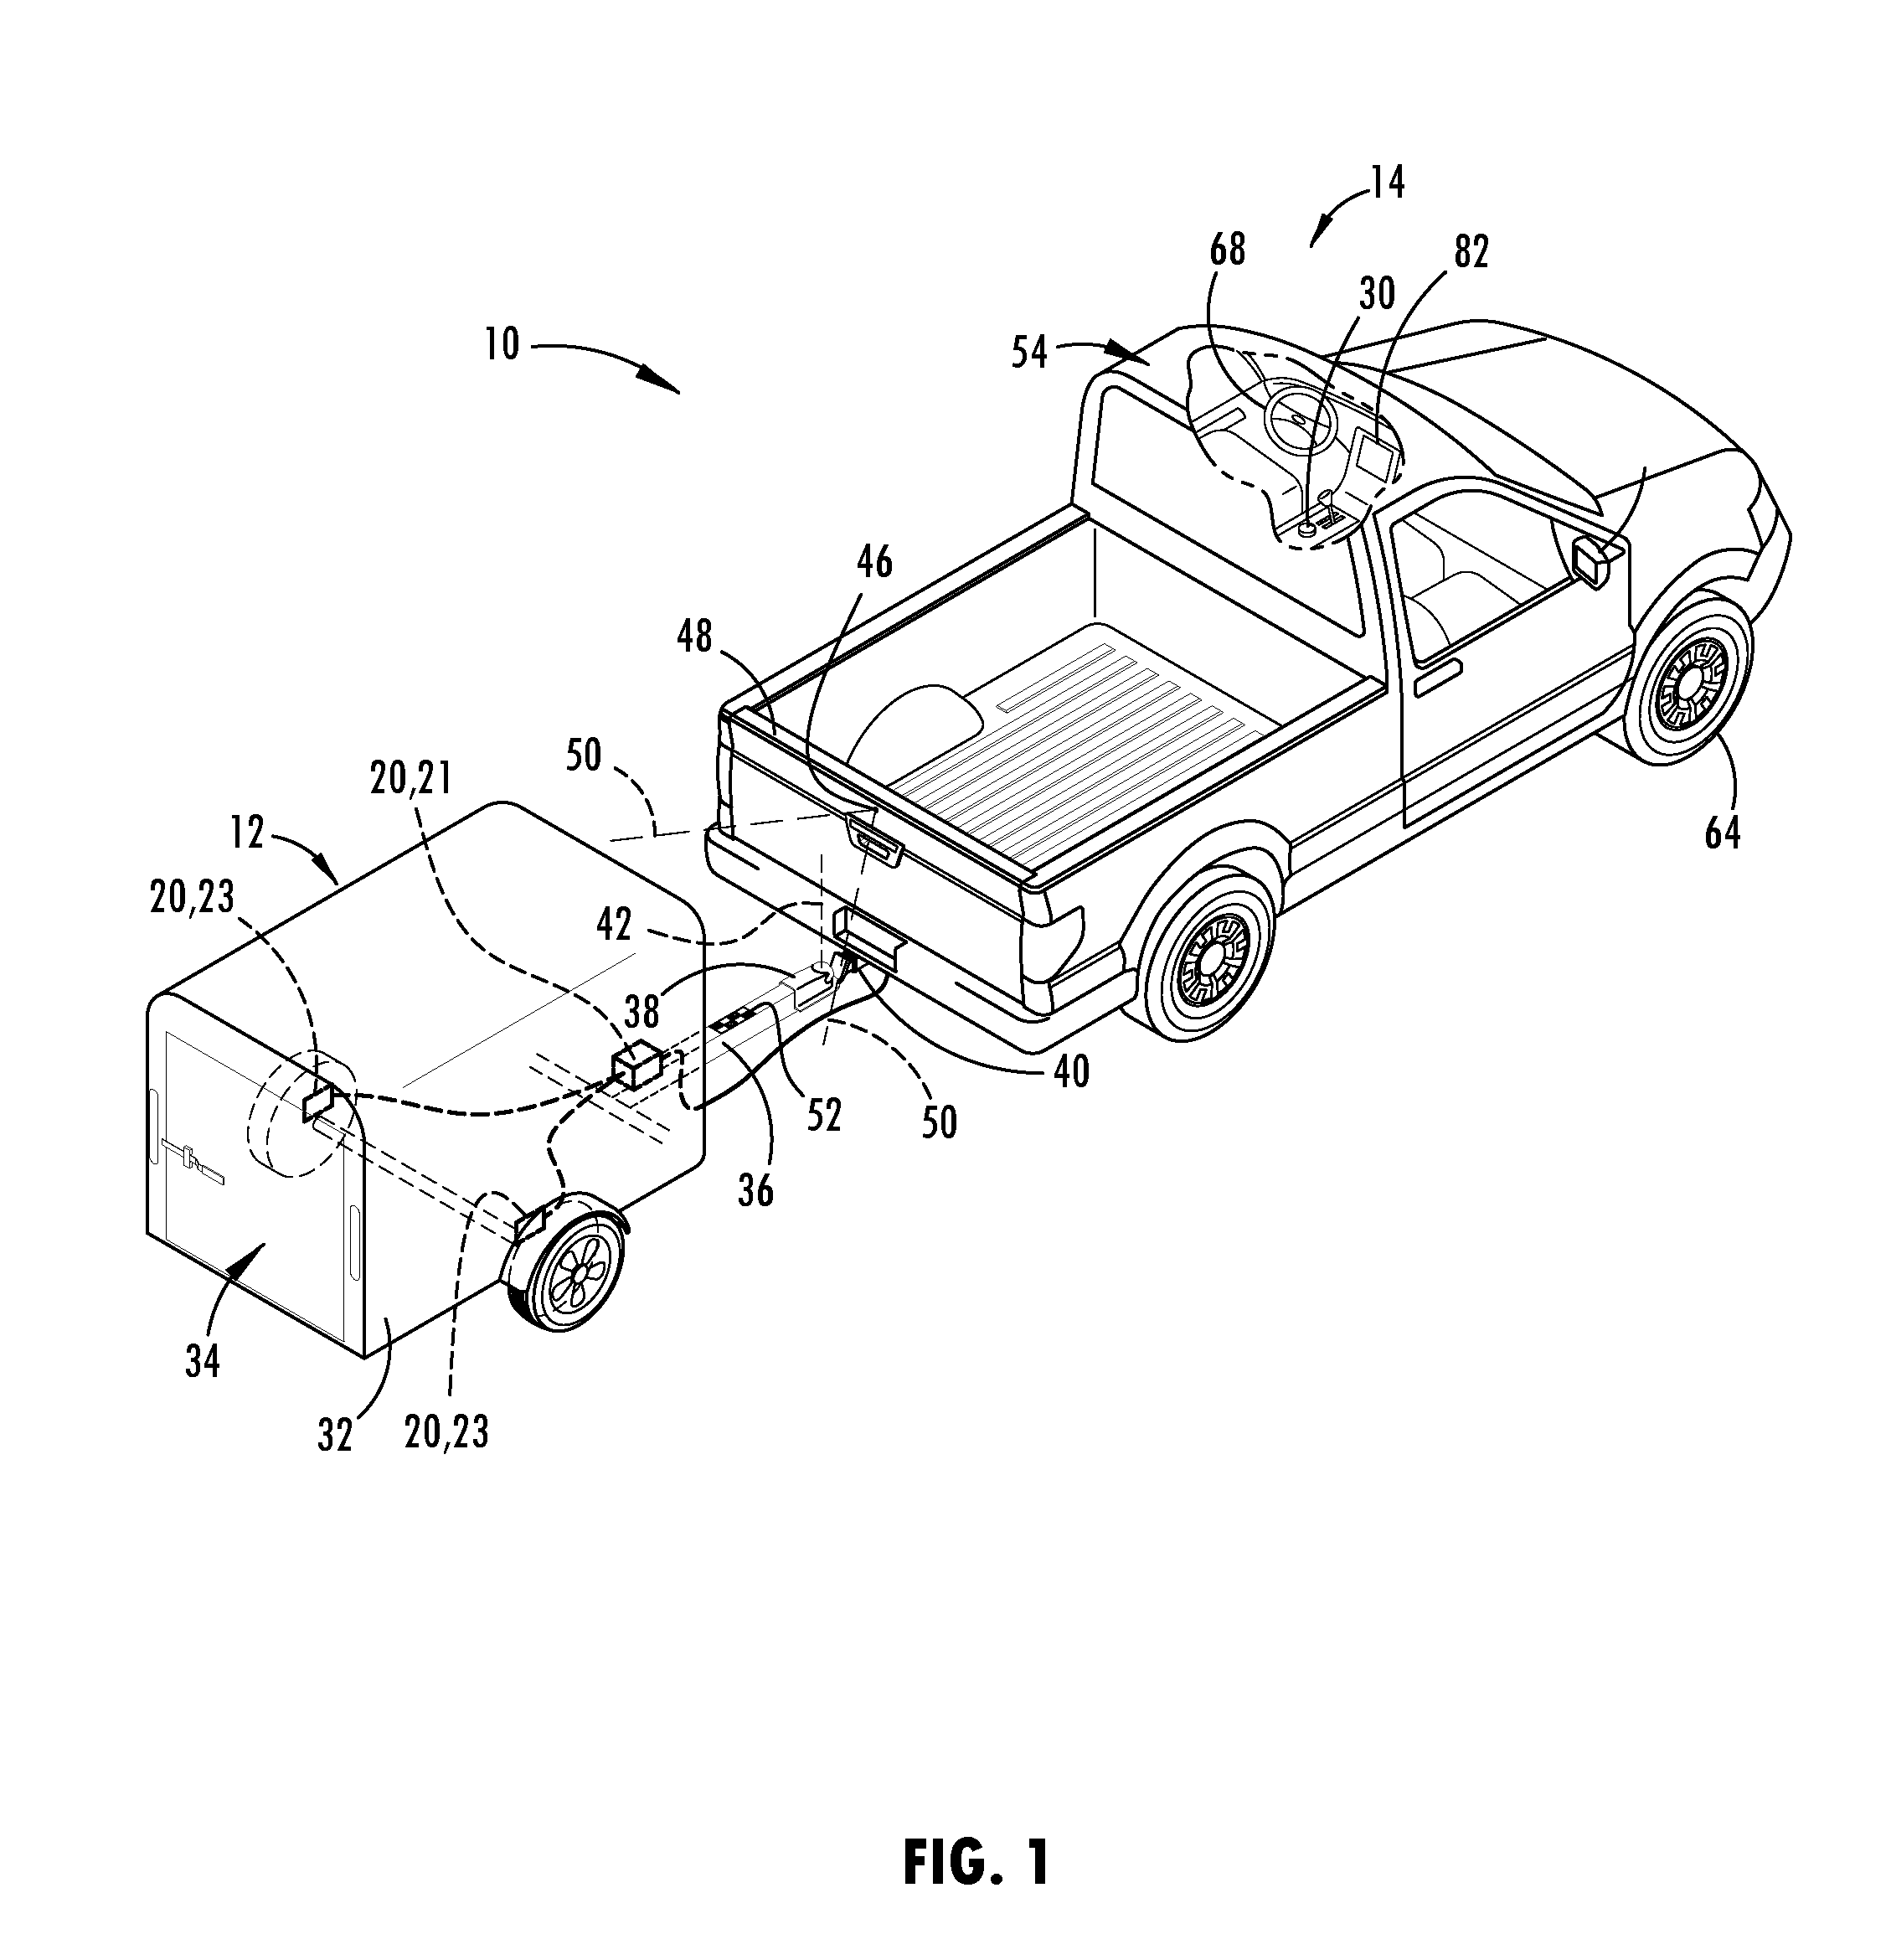 Target monitoring system and method